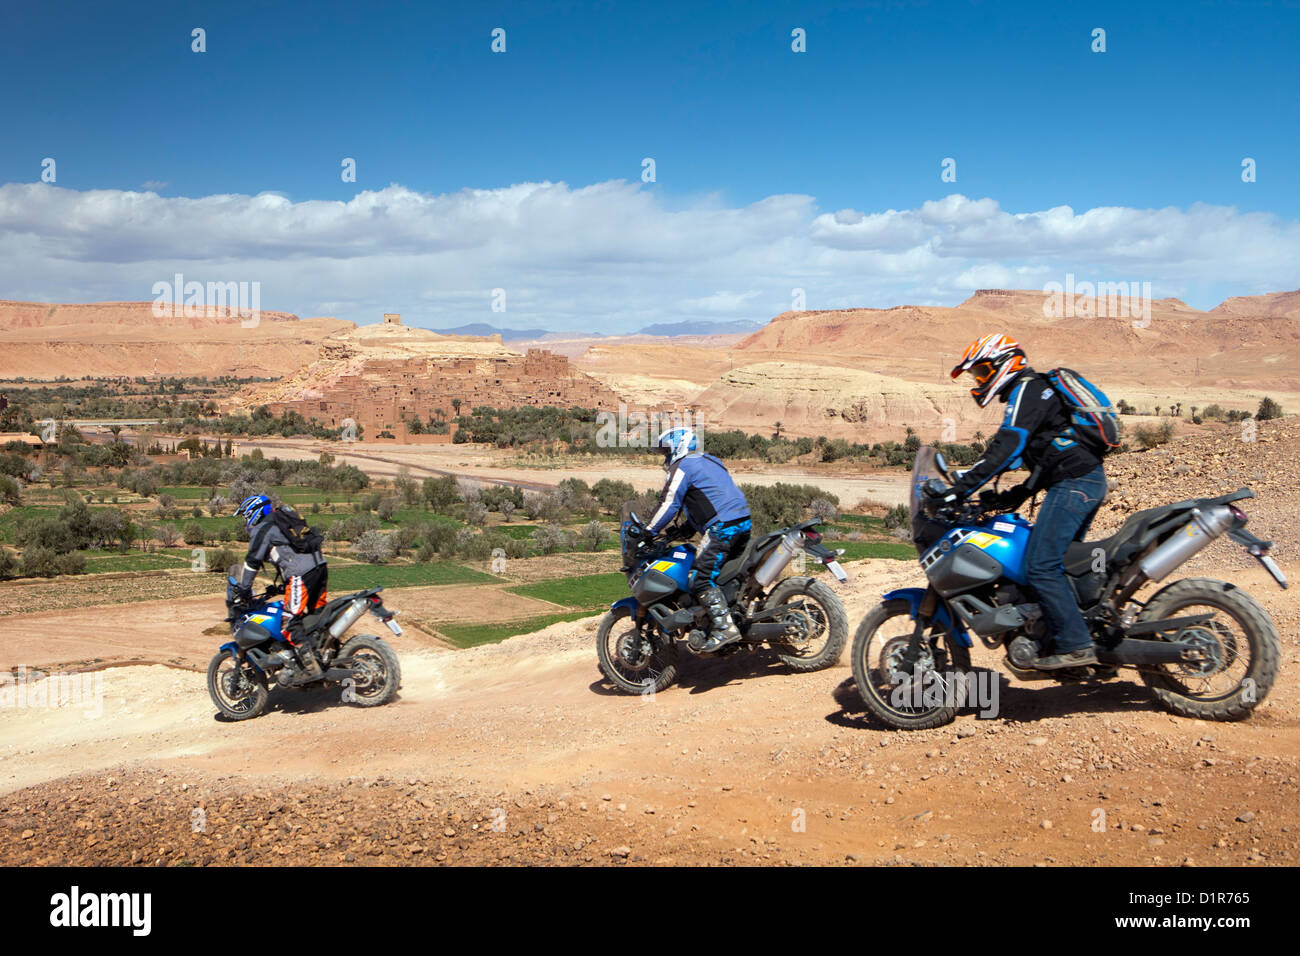 Morocco, Ait Ben Haddou, Ancient fortress or kasbah or ksar. Motorcycles. Stock Photo